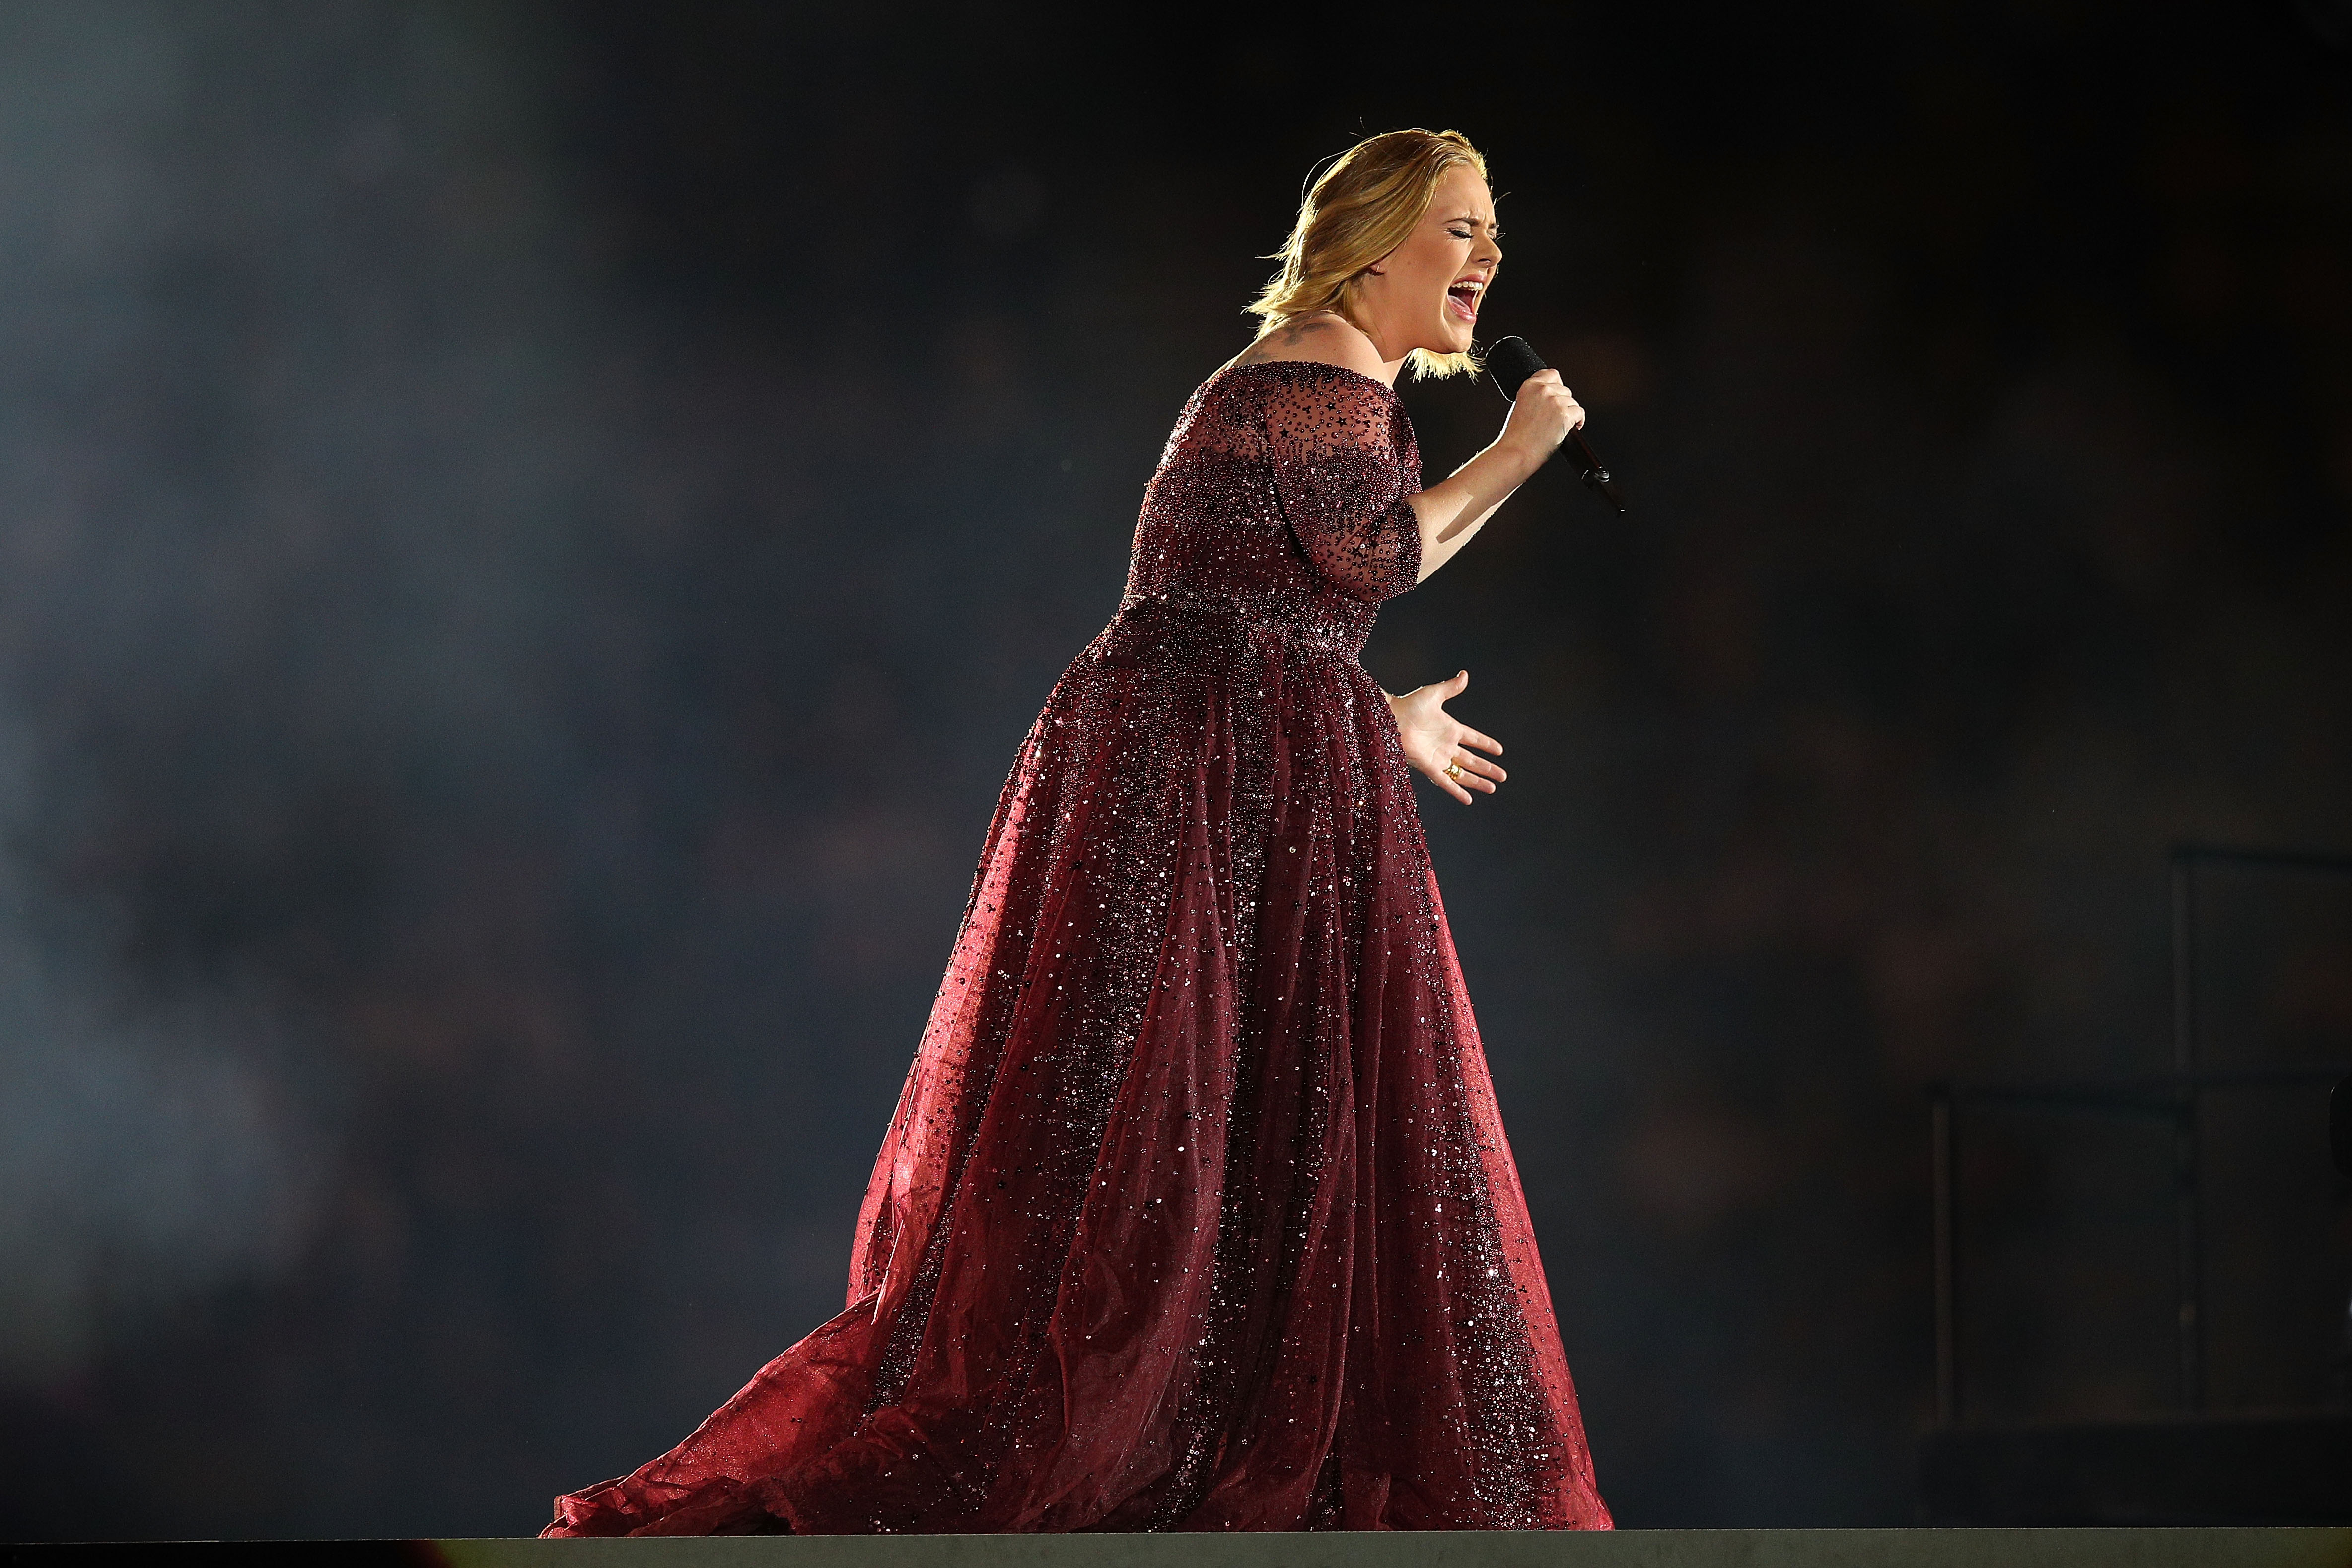 Adele performs at Etihad Stadium on March 18, 2017 in Melbourne, Australia. (Photo by Graham Denholm/Getty Images)